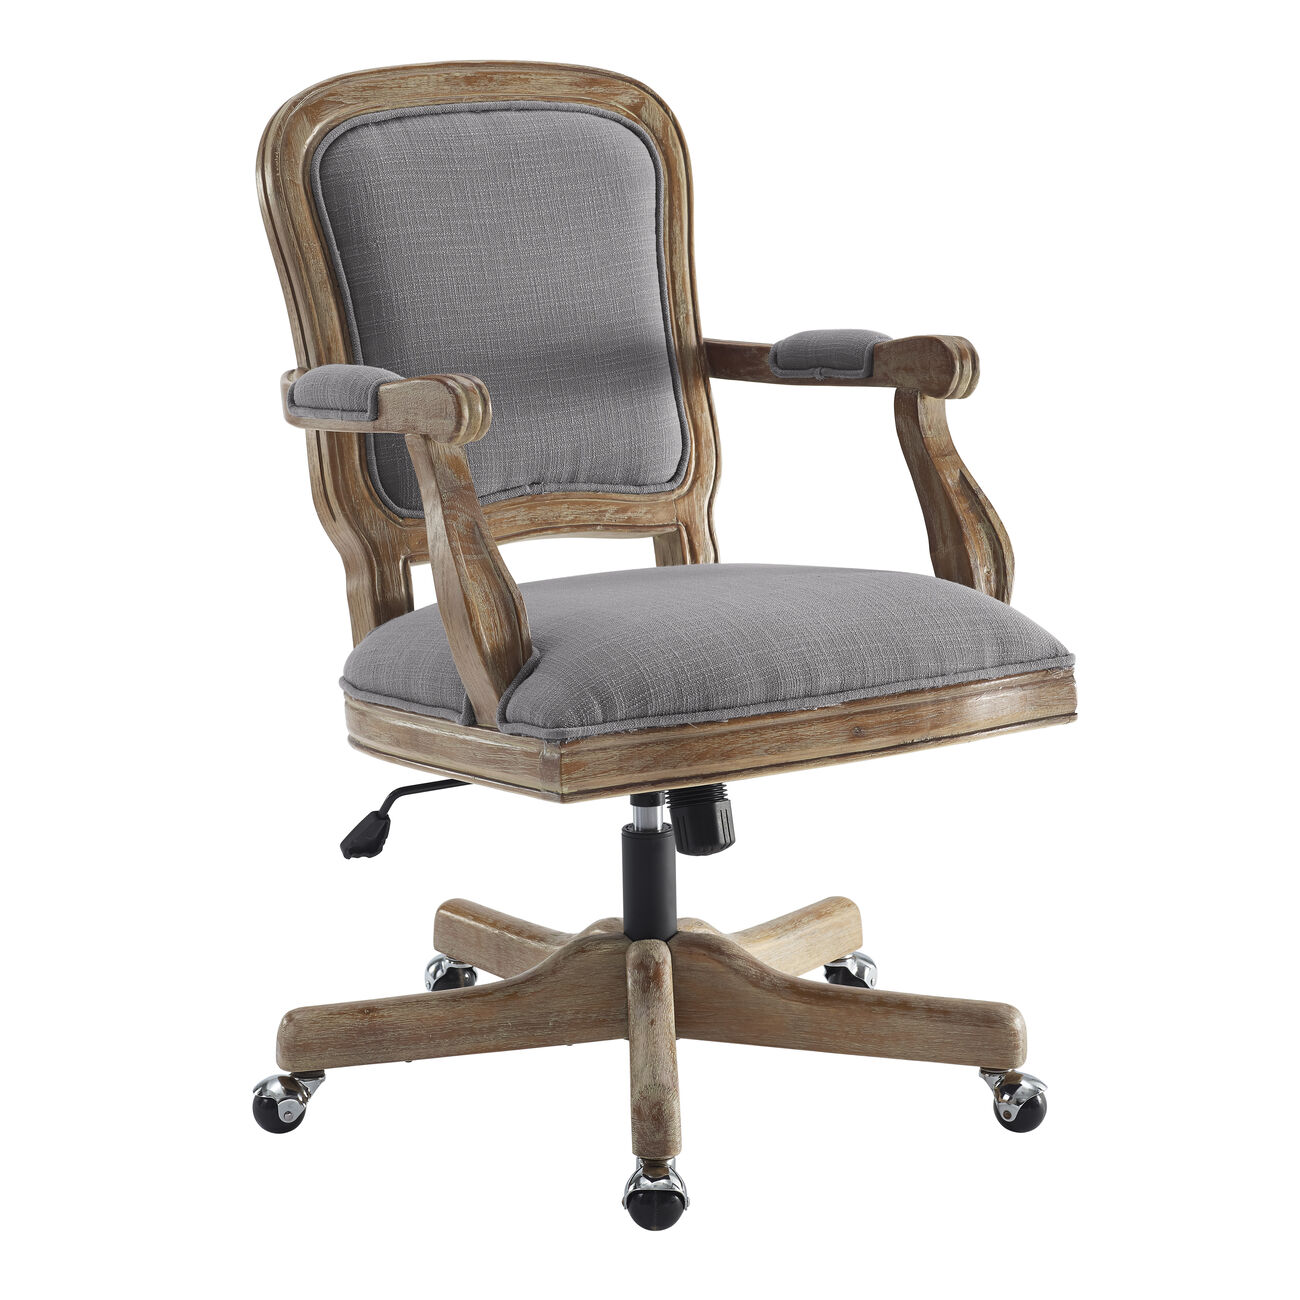 Fabric Upholstered Wooden Office Swivel Chair with Adjustable Height, Gray